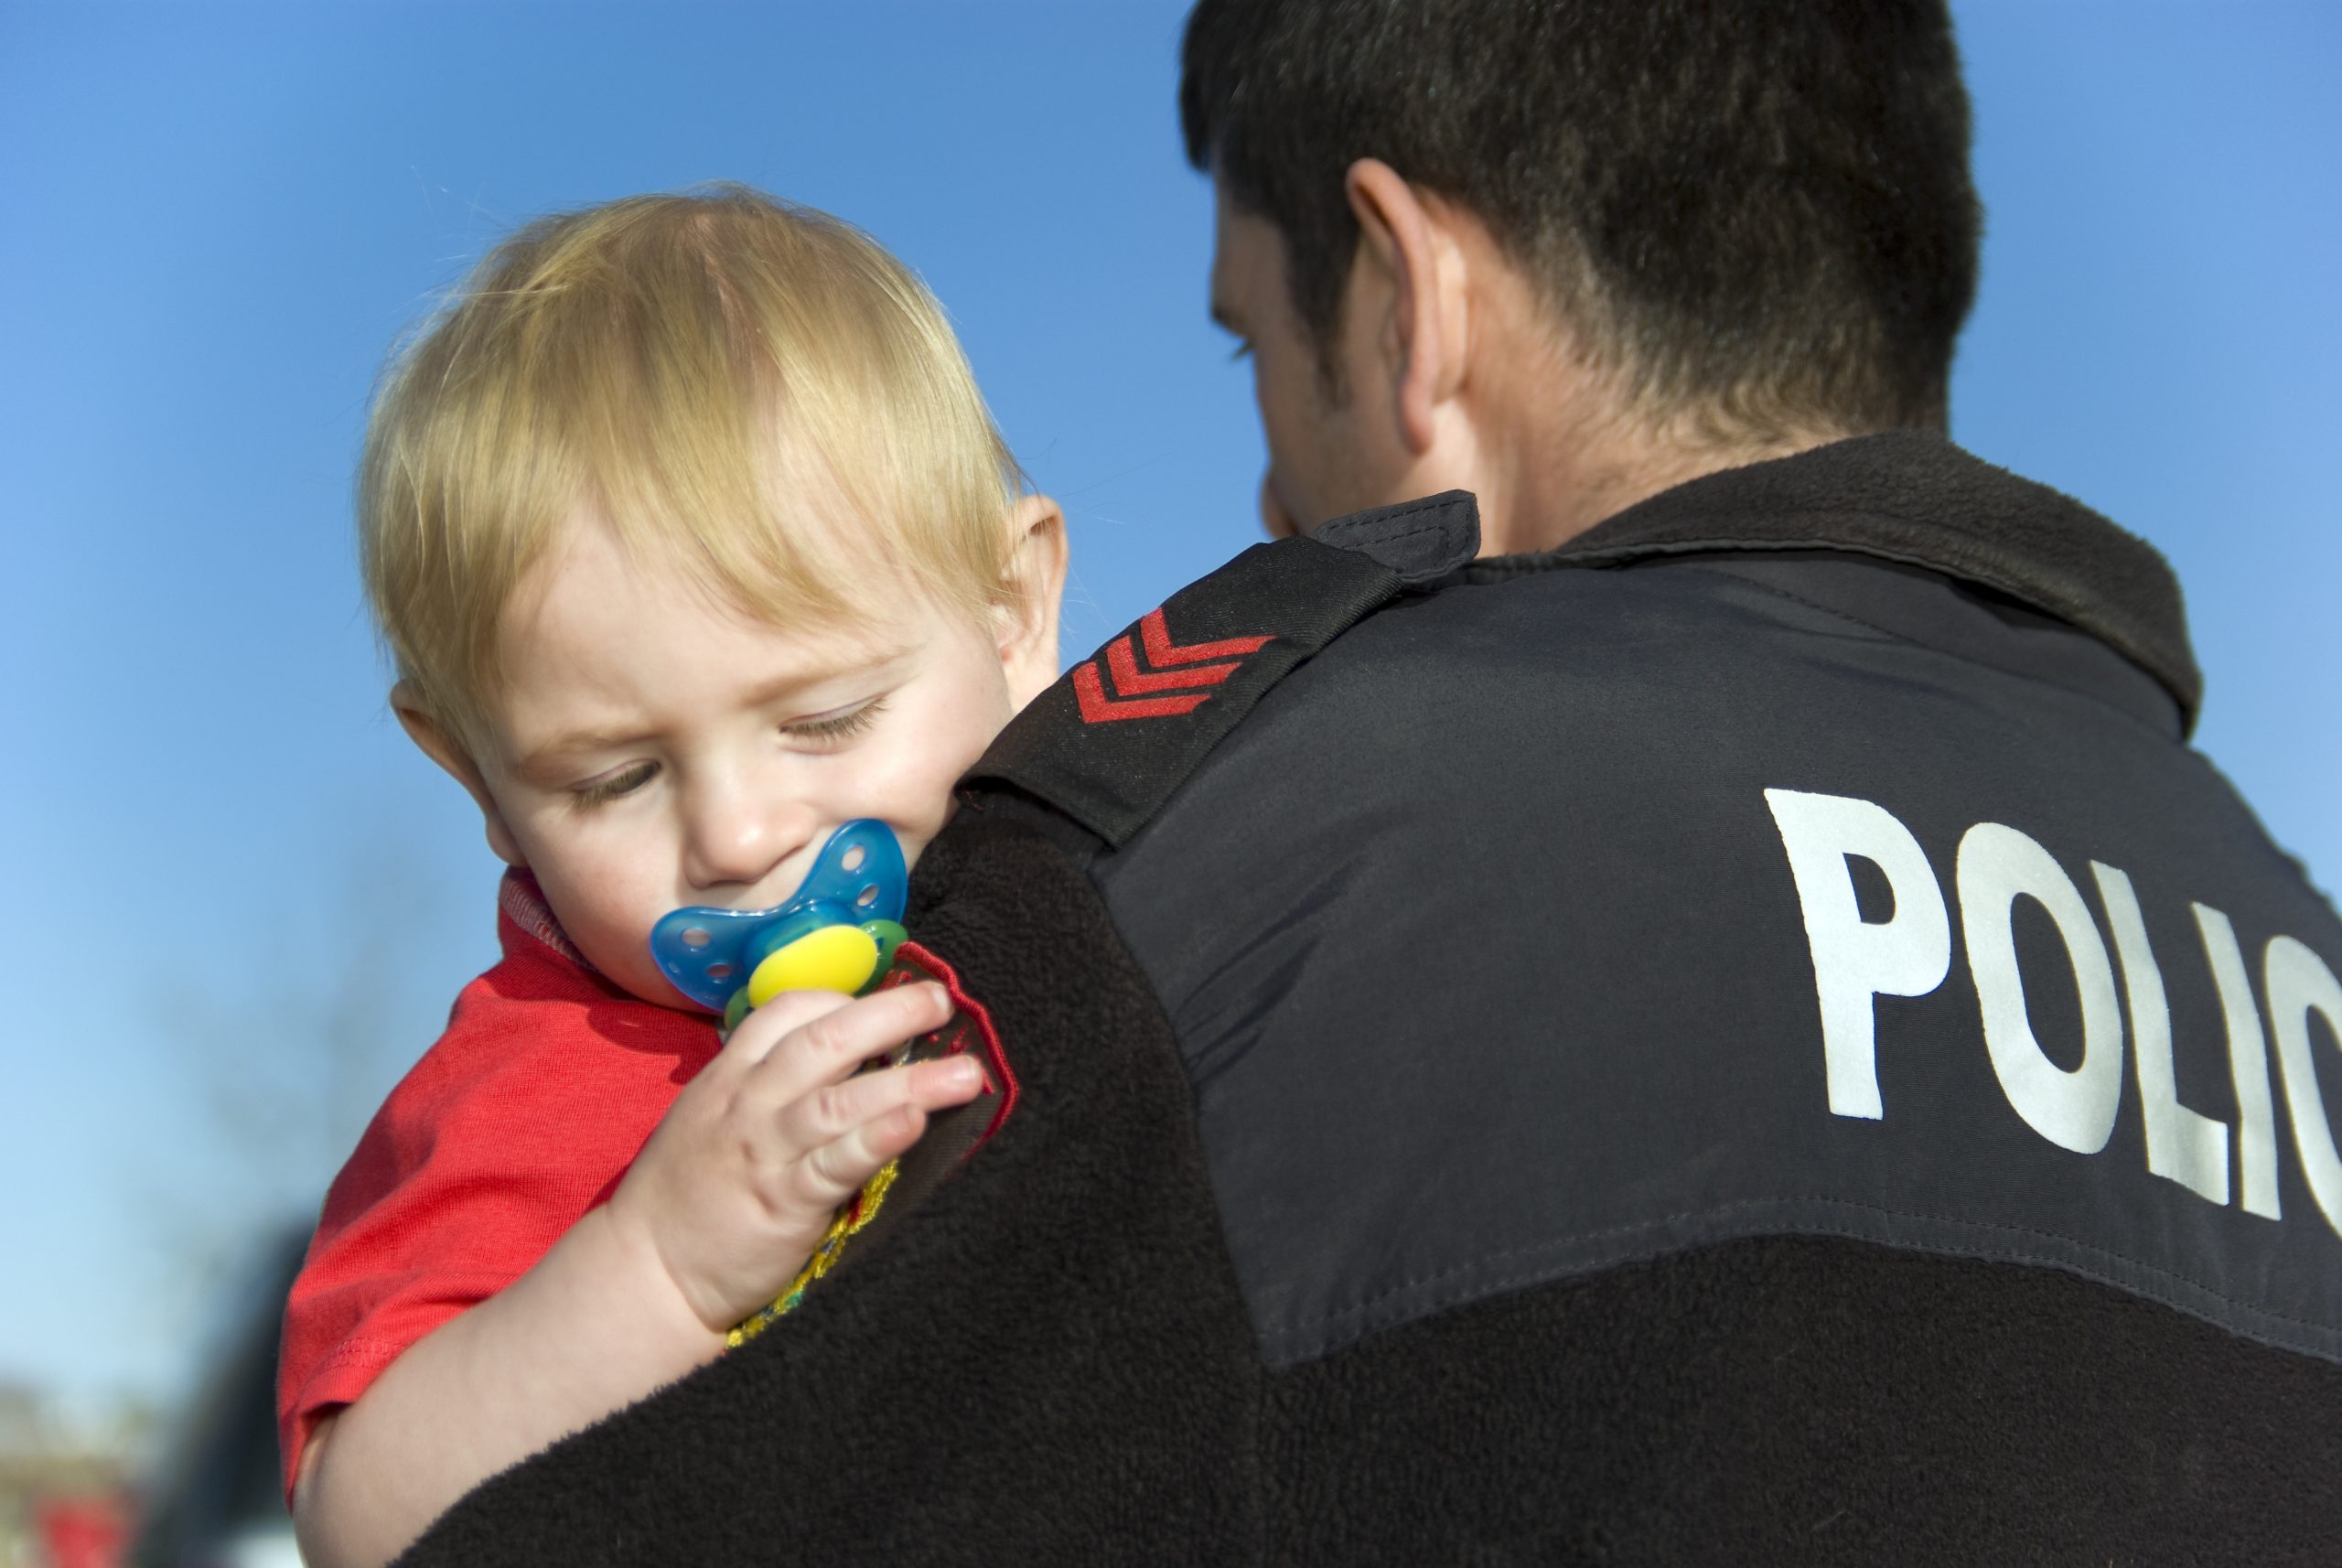 A Cop’s Tips for Keeping Young Kids Safe